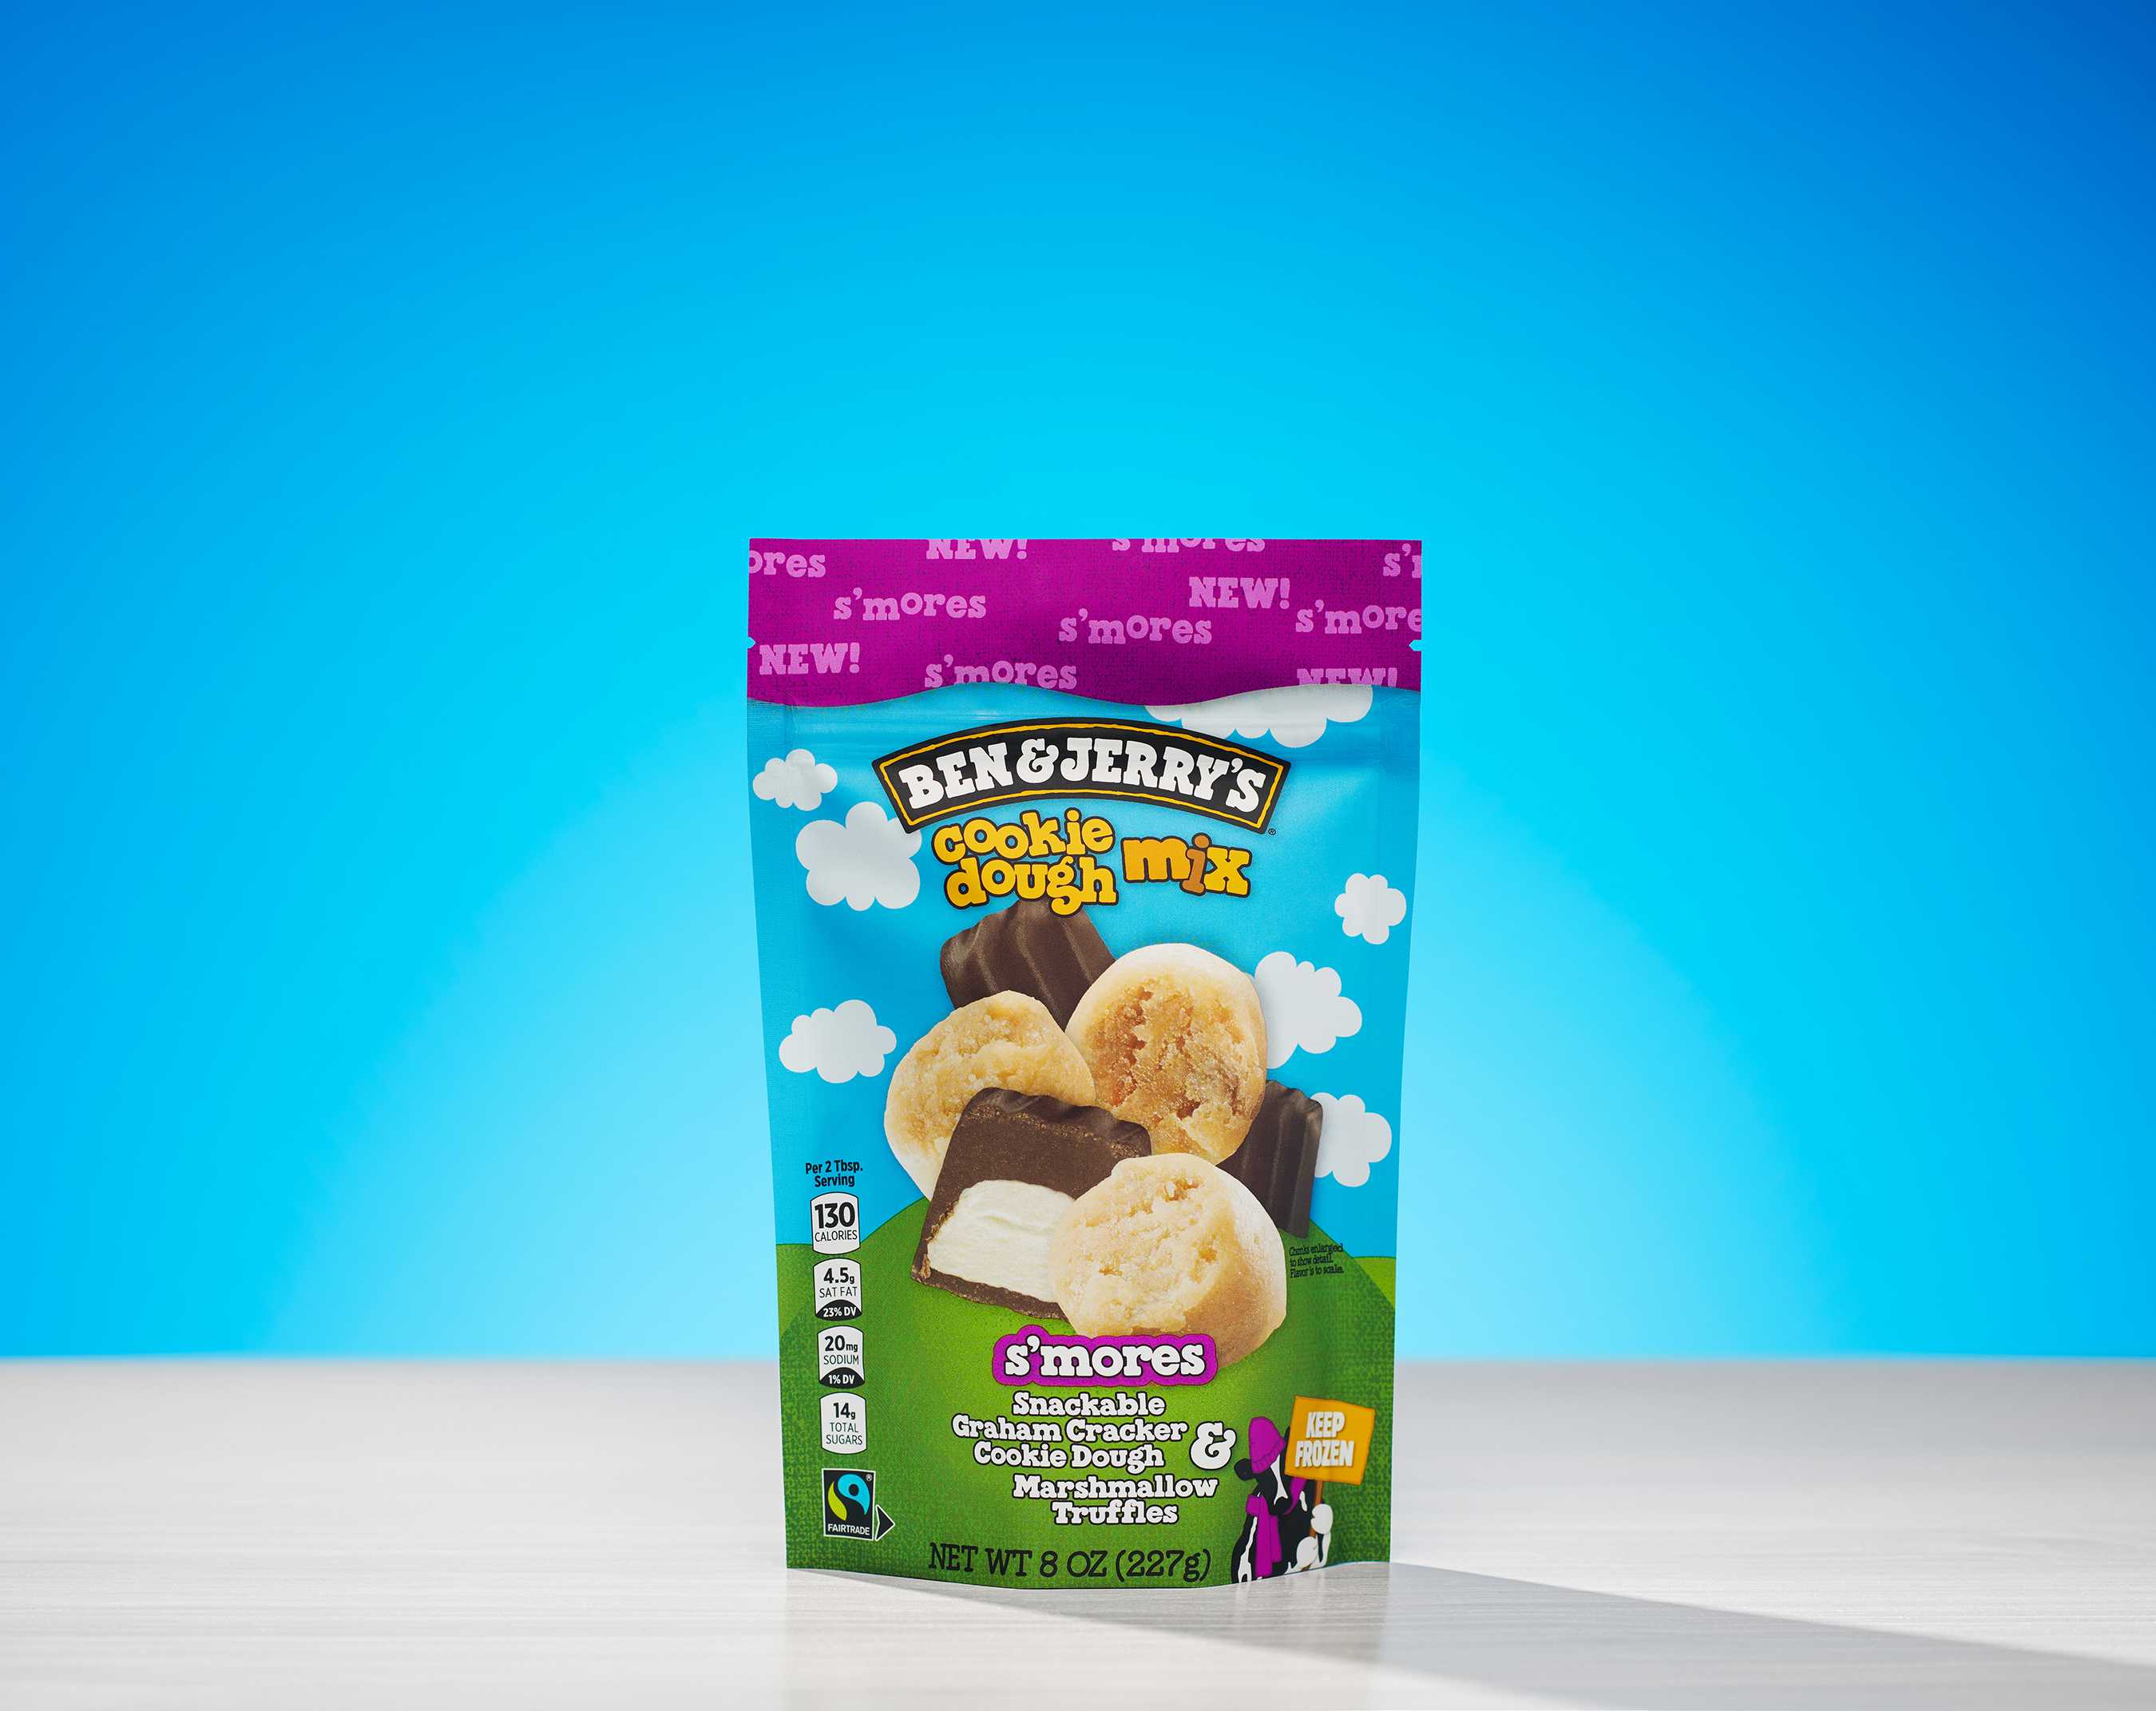 The new Smores Cookie Dough Mix unveiled by Ben & Jerrys features snackable graham cracker cookie dough with marshmallow truffles.